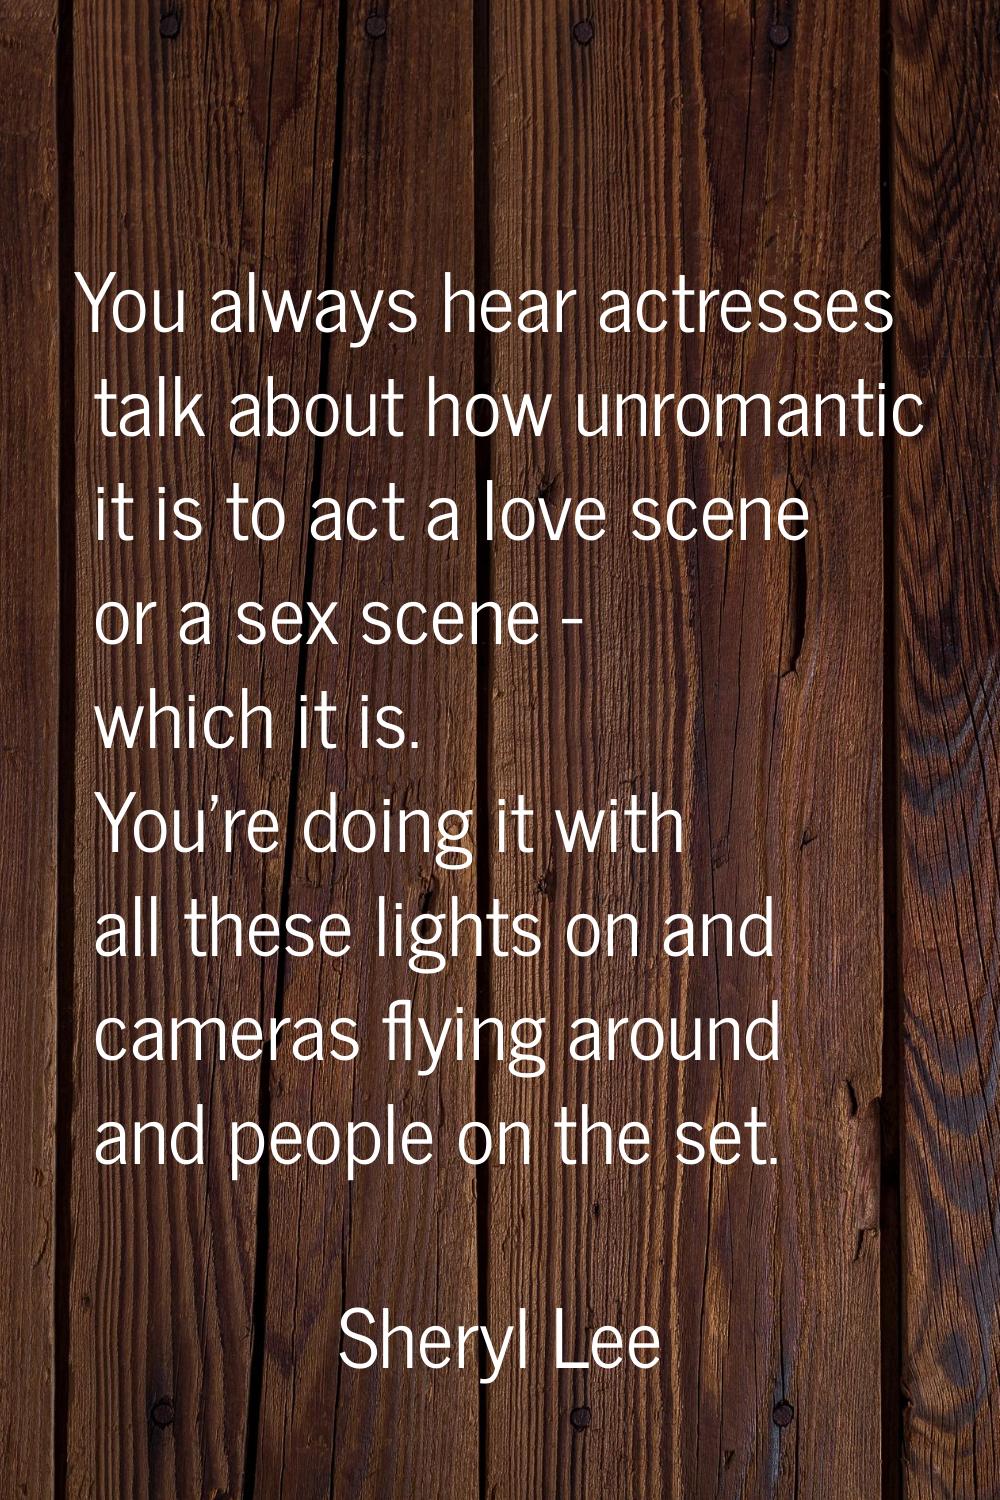 You always hear actresses talk about how unromantic it is to act a love scene or a sex scene - whic